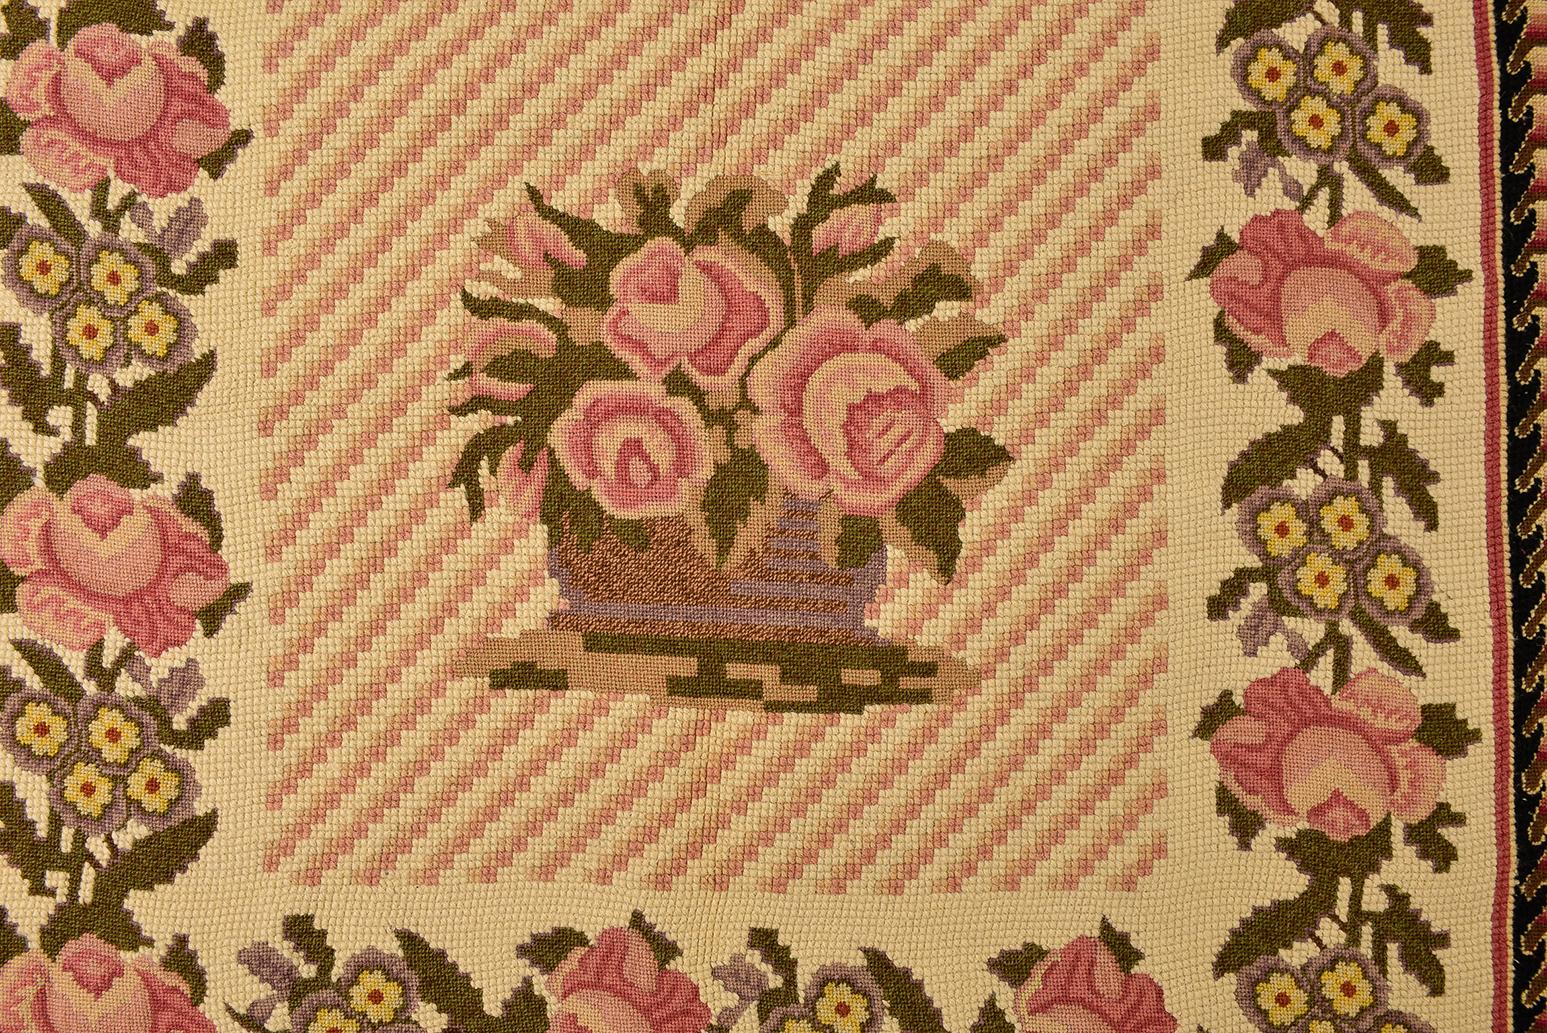 Enjoyable embroidered tissues, suitable as large cushions with cheerful bouquets of flowers -
nr. 361 - 362.
